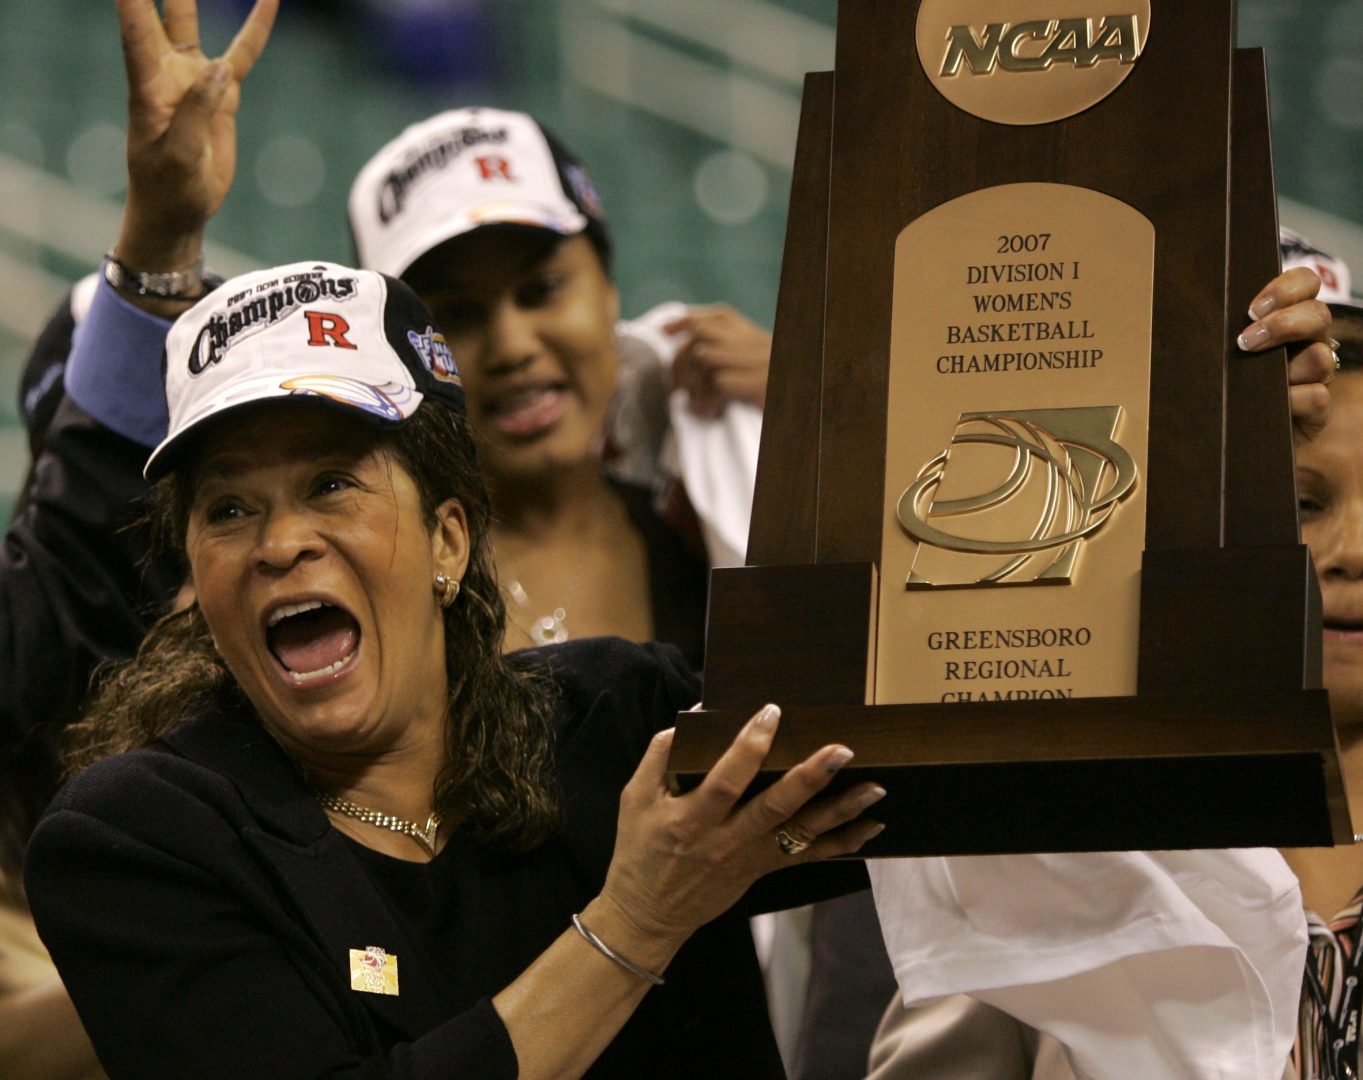 FiLE - Rutgers coach C. Vivian Stringer holds the trophy after Rutgers defeated Arizona State 64-45 in the regional final of the NCAA women's basketball tournament in Greensboro, N.C., Monday, March 26, 2007. Stringer has announced her retirement, Saturday, April 30, 2022, after 50 years in college basketball. She finished with 1,055 wins, fourth all-time among Division I women’s basketball coaches. (AP Photo/Mary Ann Chastain)